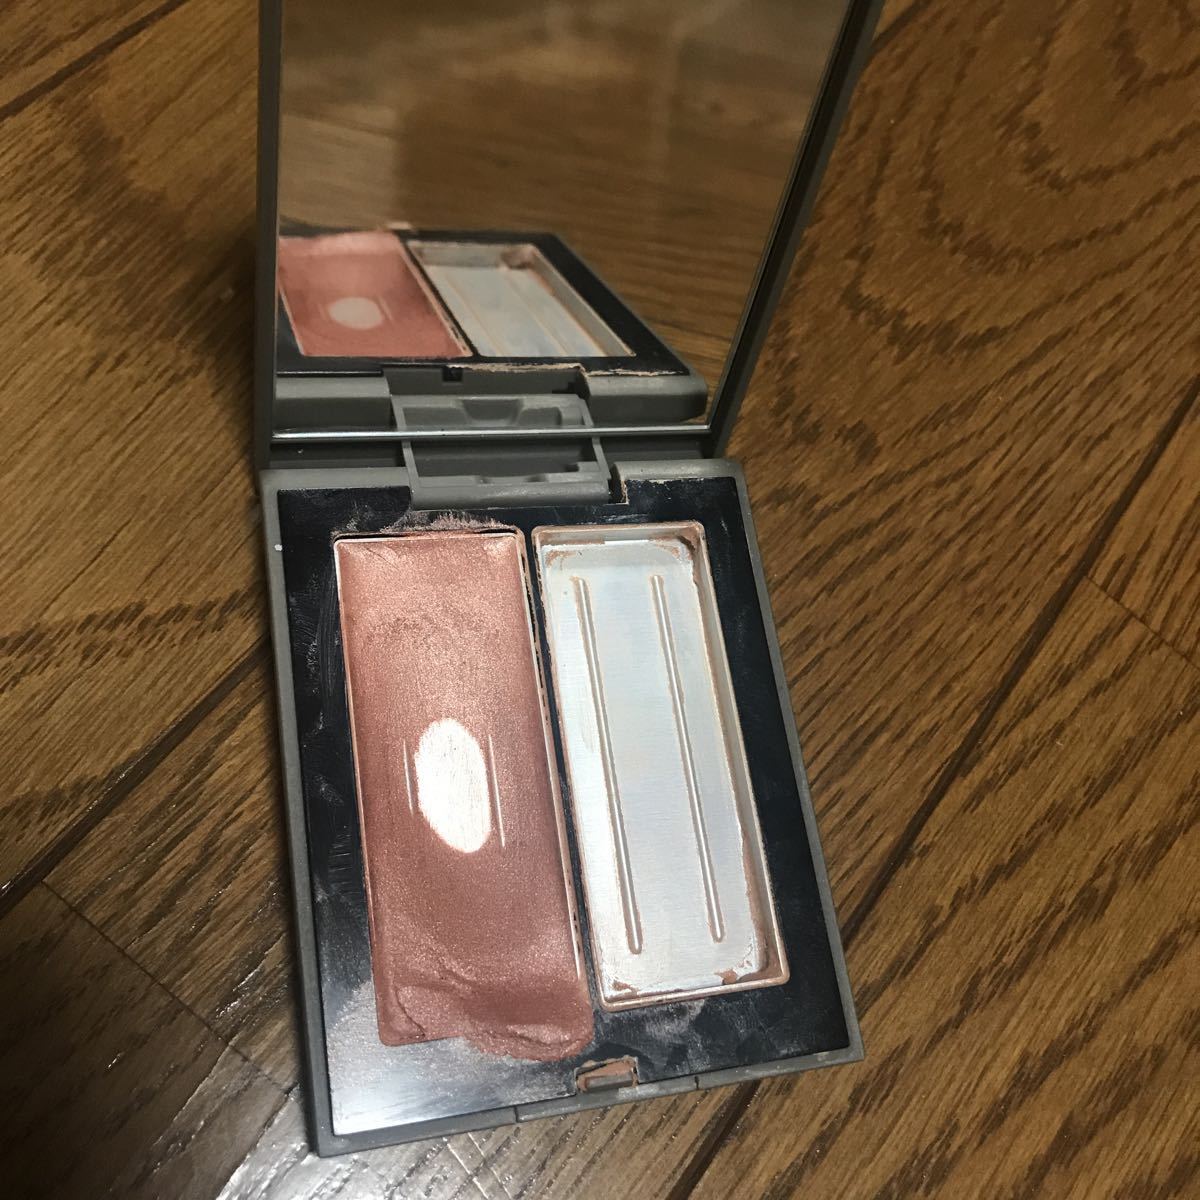 THREEs Lee sima ring glow Duo 01 used comparatively remains! cheaply! cosme part for foundation shadow also possible to use!